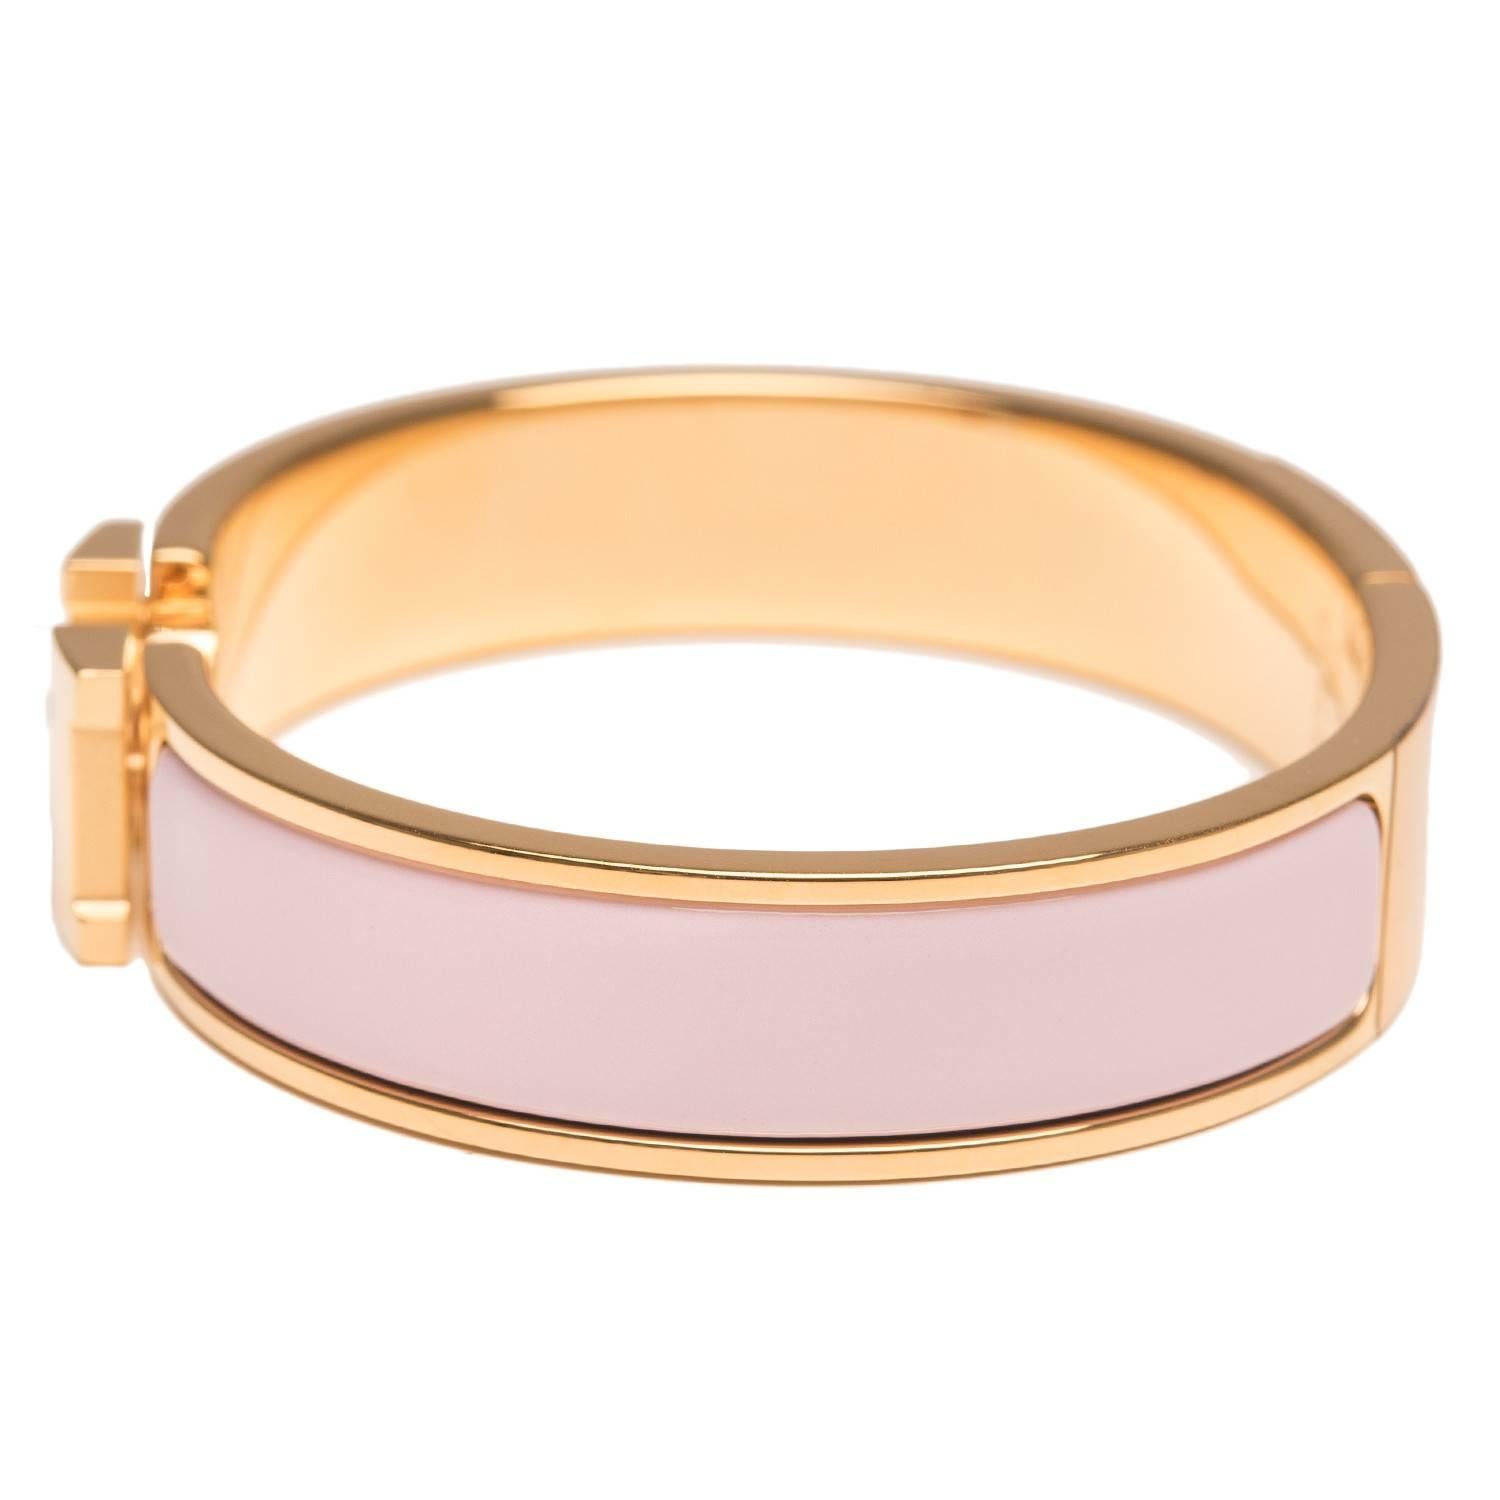 Hermes narrow Clic Clac H bracelet in Rose Dragee enamel with gold plated hardware in size PM. 

Origin: France

Condition: Never Carried

Accompanied by: Hermes box, Hermes dustbag, Ribbon

Measurements: Diameter: 2.25